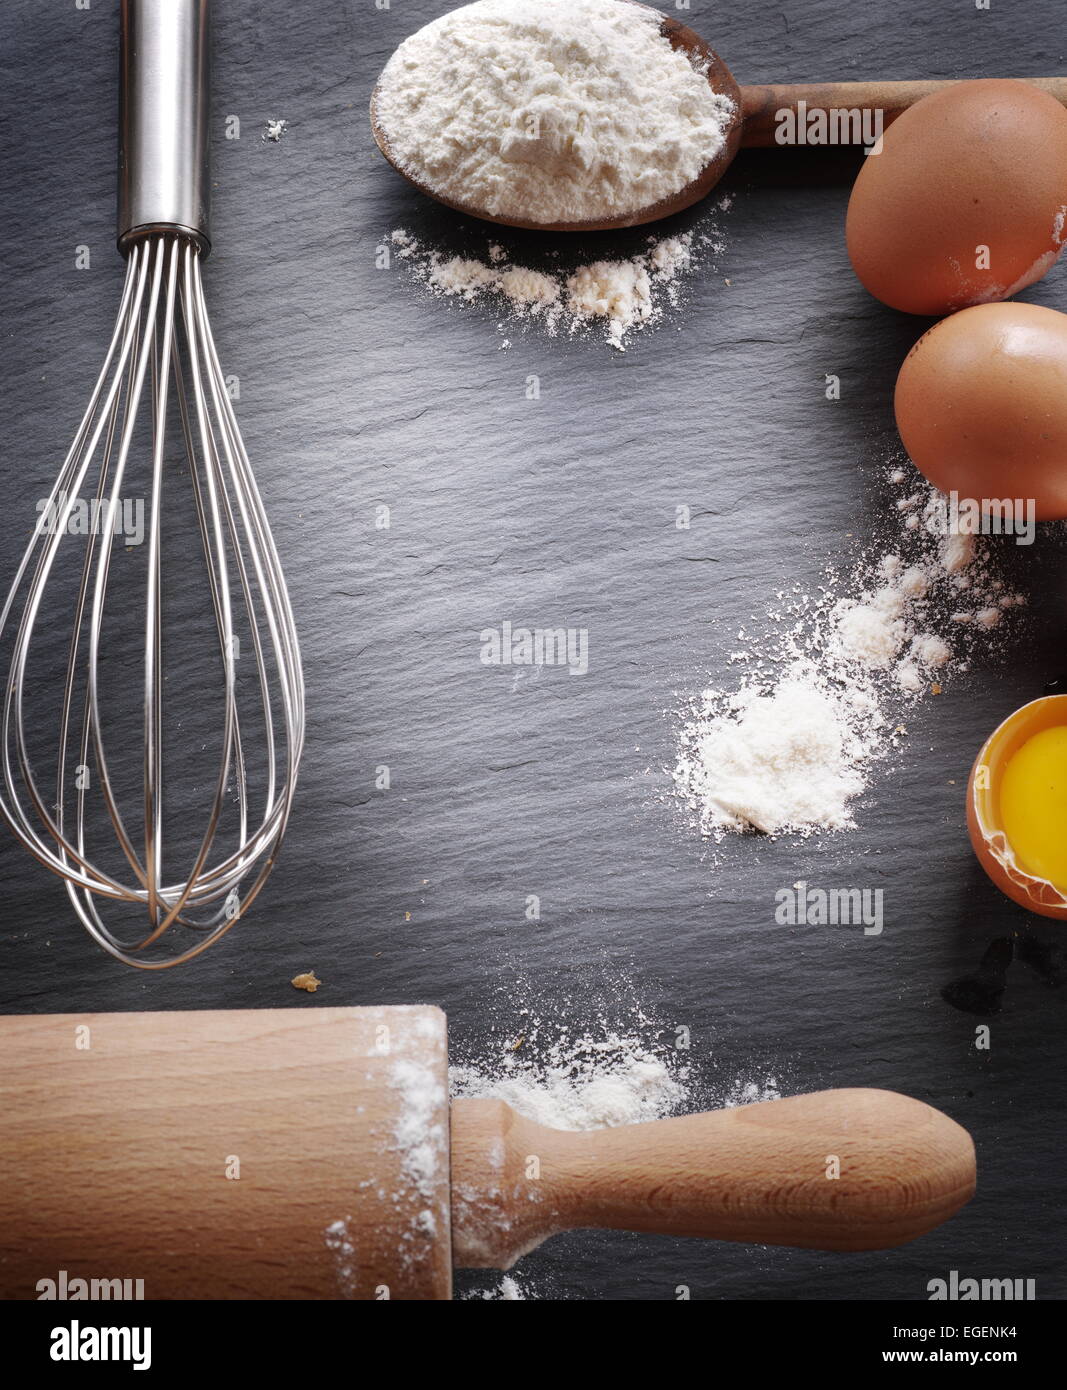 Dough preparation. Baking ingredients: egg and flour on black board. Stock Photo